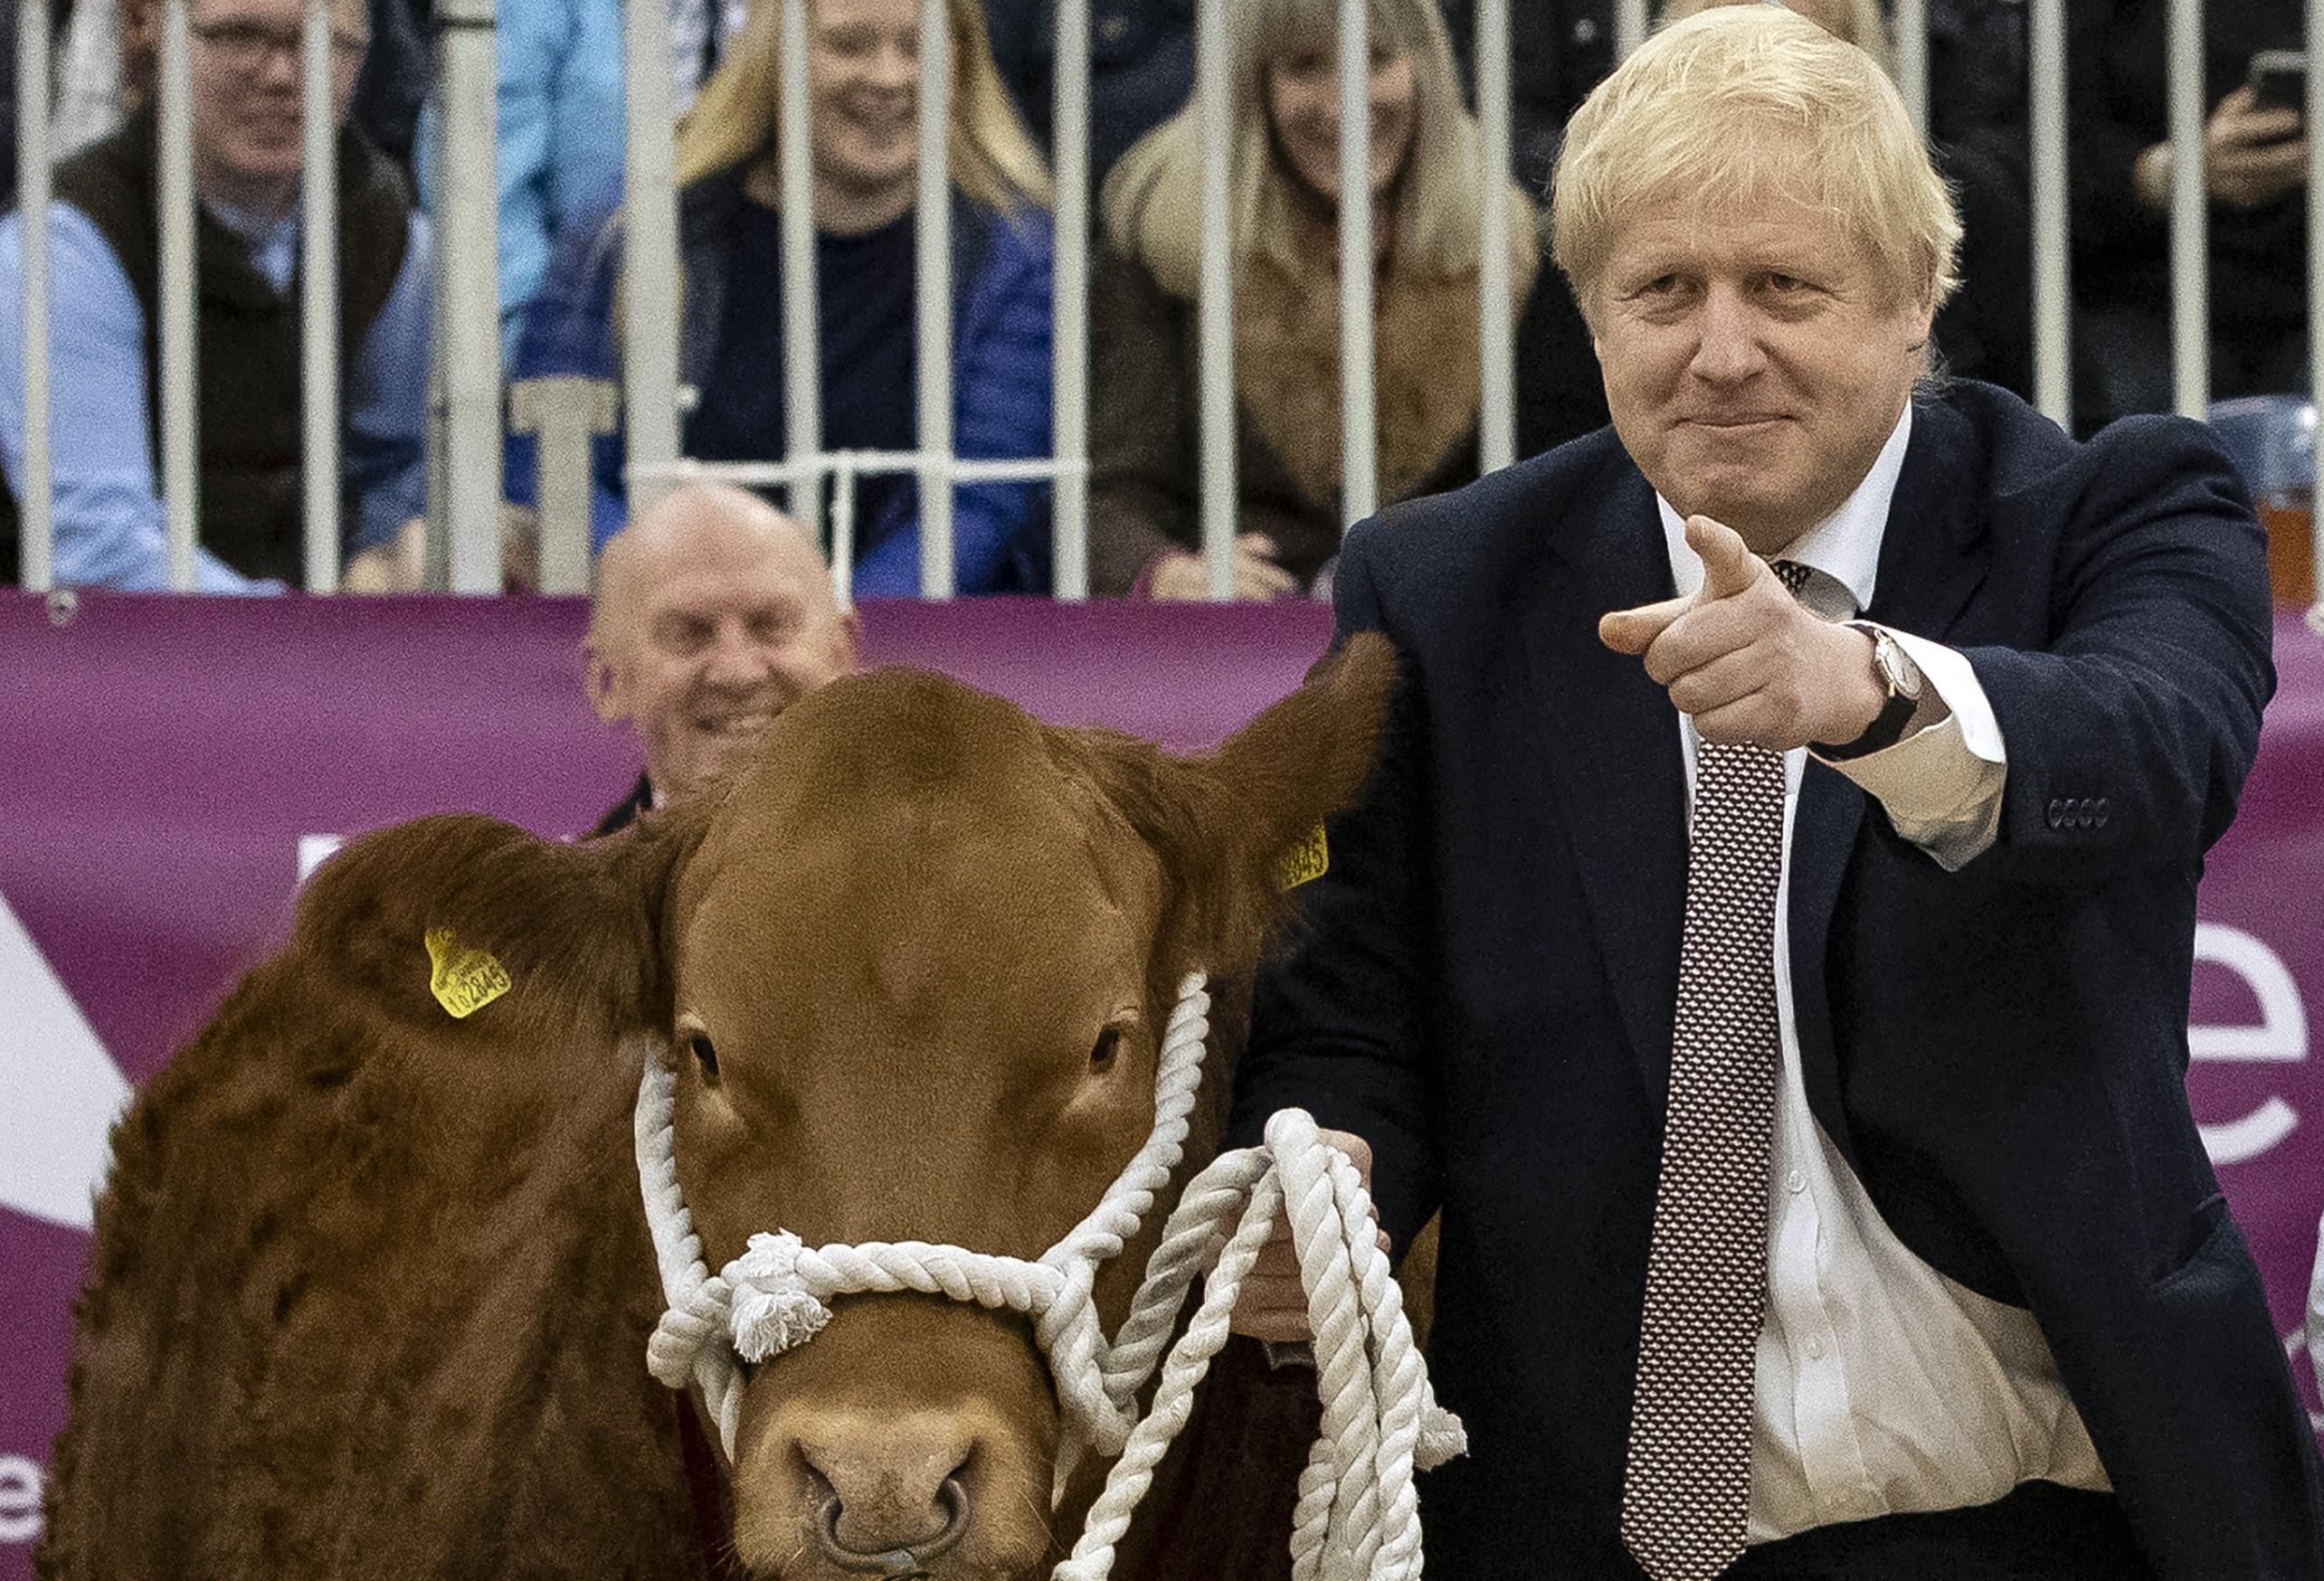 Britain's Prime Minister Boris Johnson holds a bull in the show ring while visiting the Royal Welsh Winter Fair during an election campaign event in Llanelwedd in north Wales on 25 November (AFP)